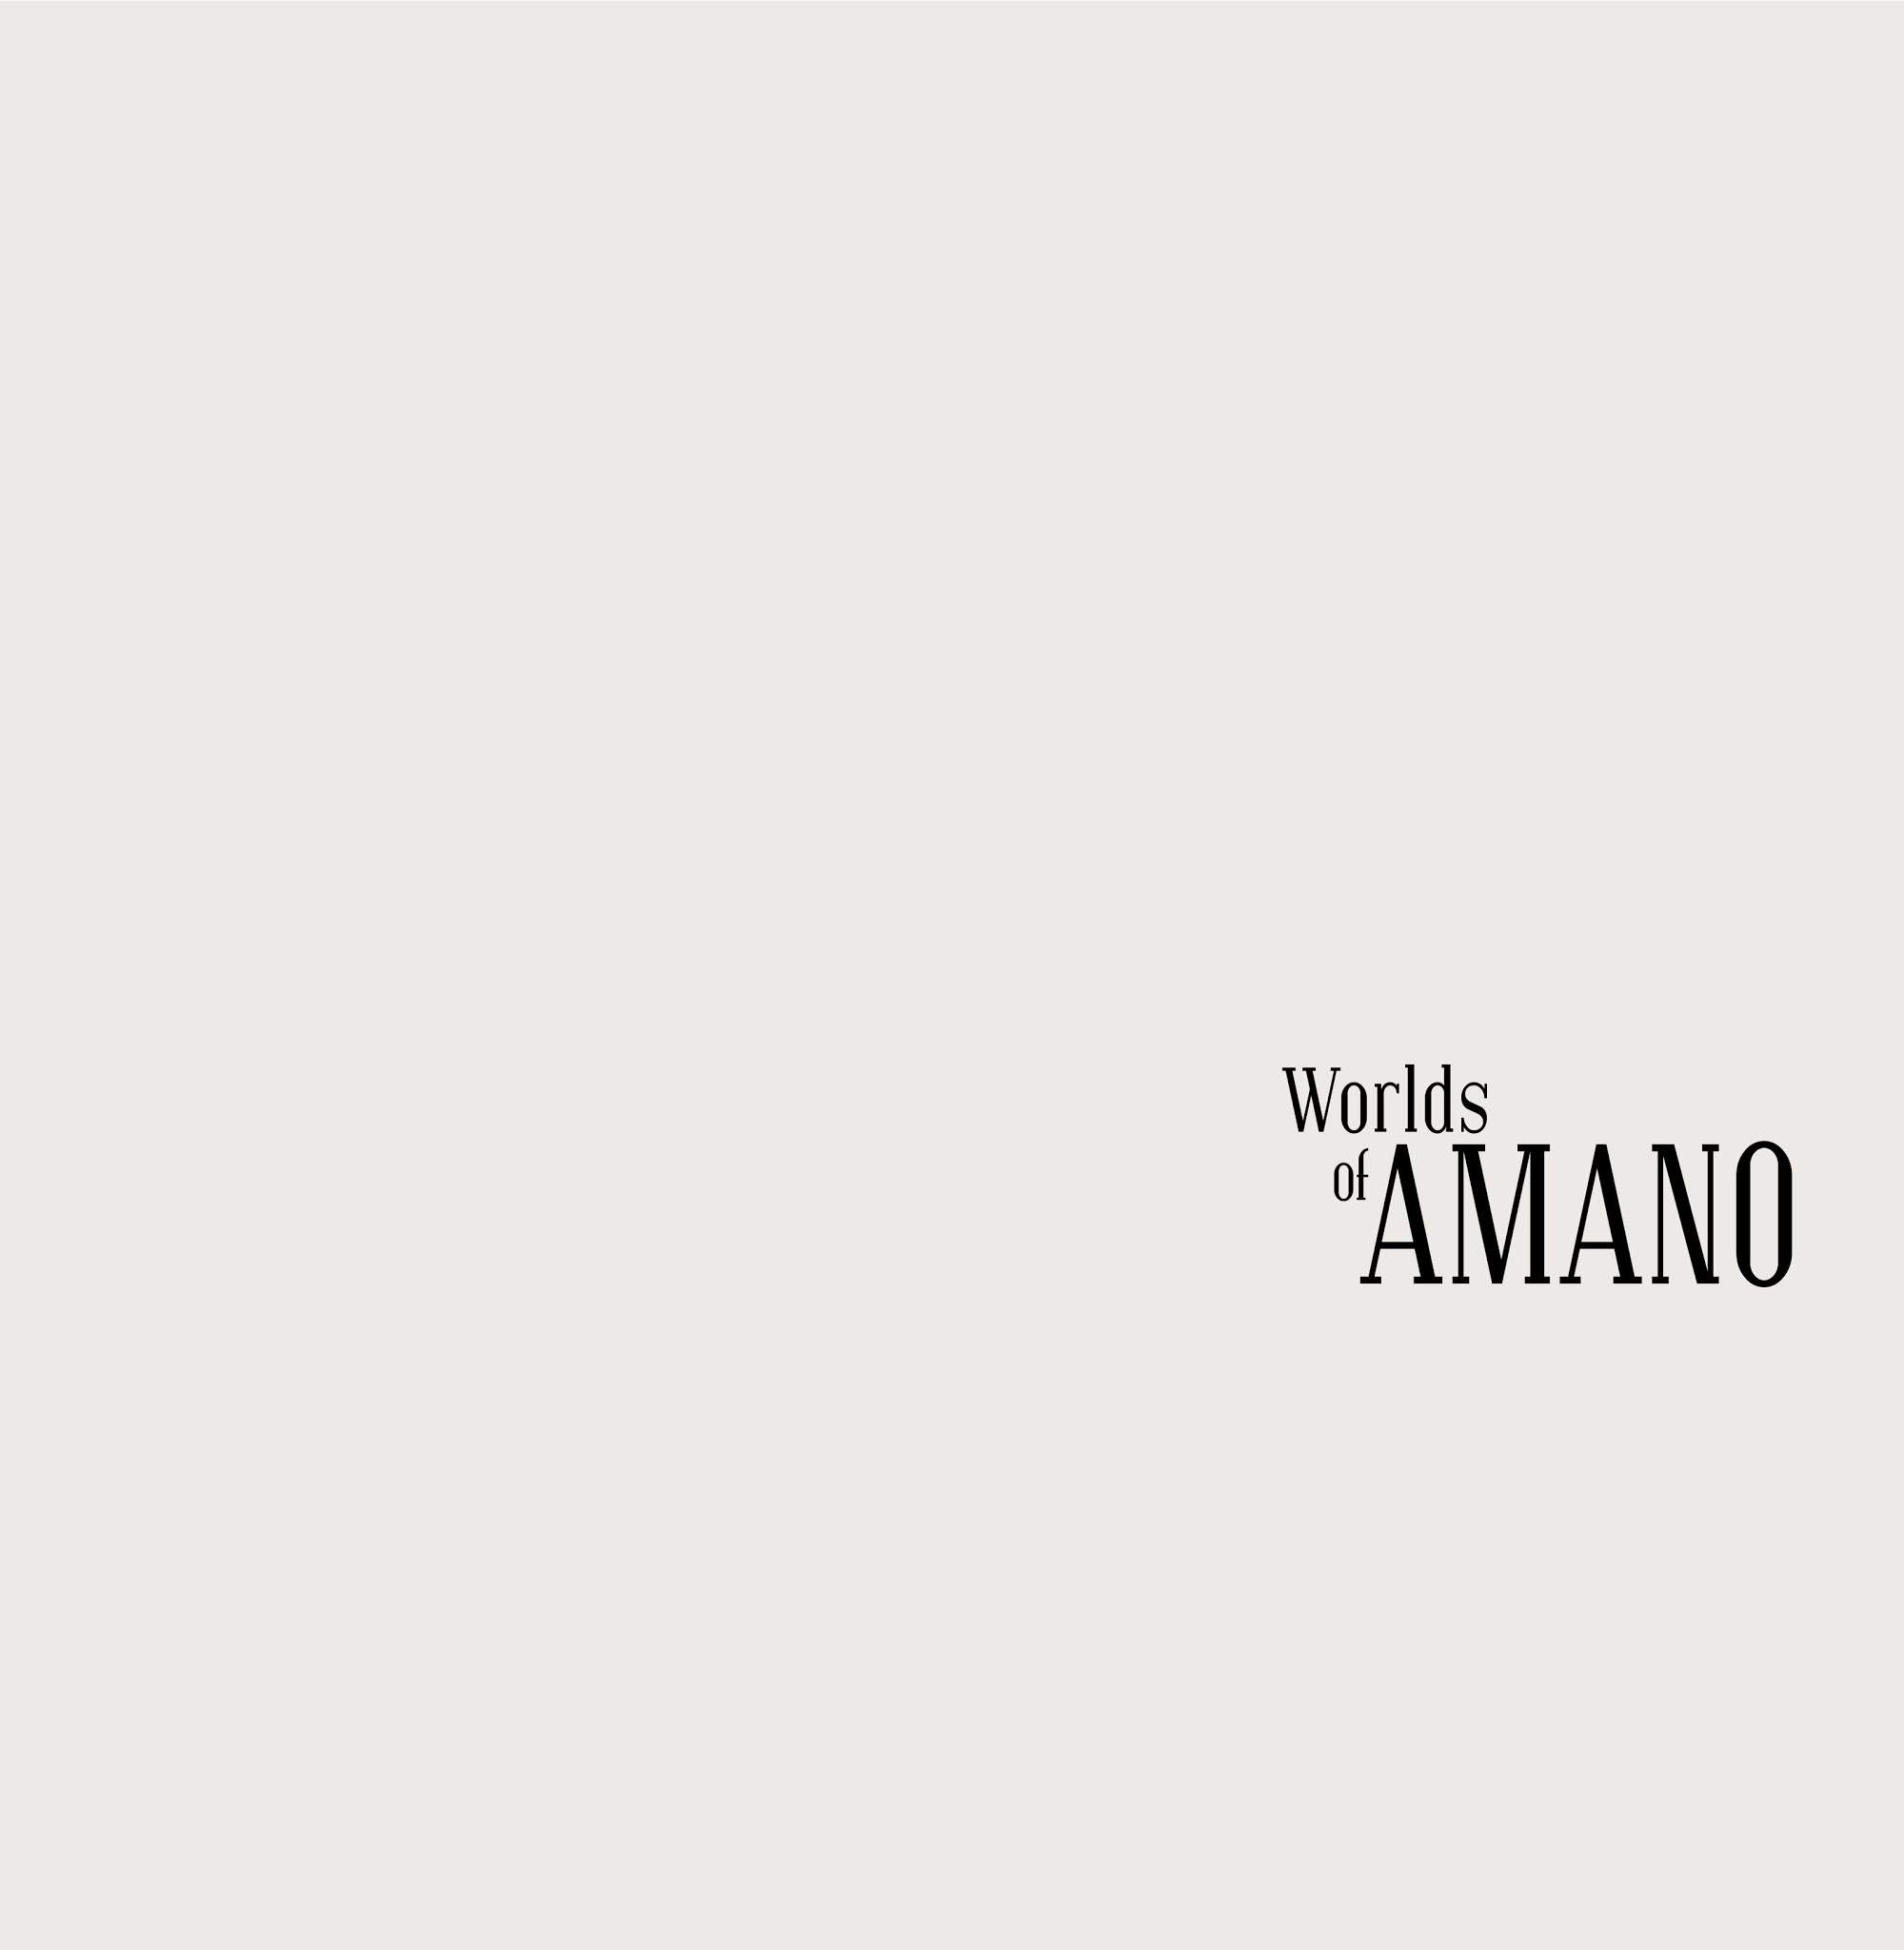 Read online Worlds of Amano comic -  Issue # TPB - 3